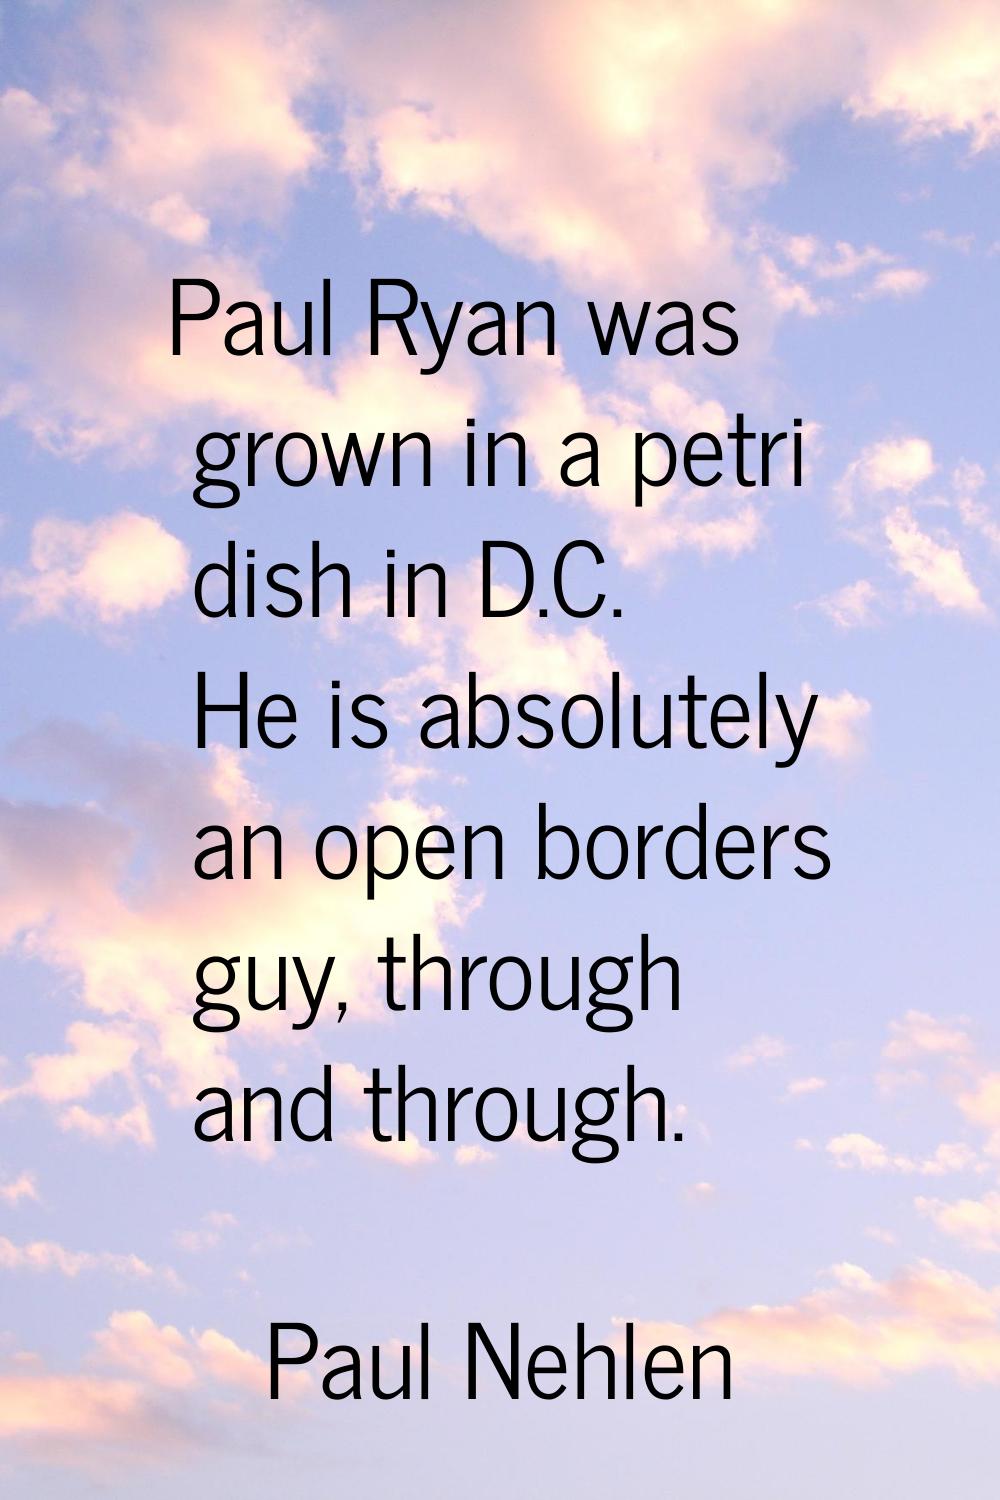 Paul Ryan was grown in a petri dish in D.C. He is absolutely an open borders guy, through and throu